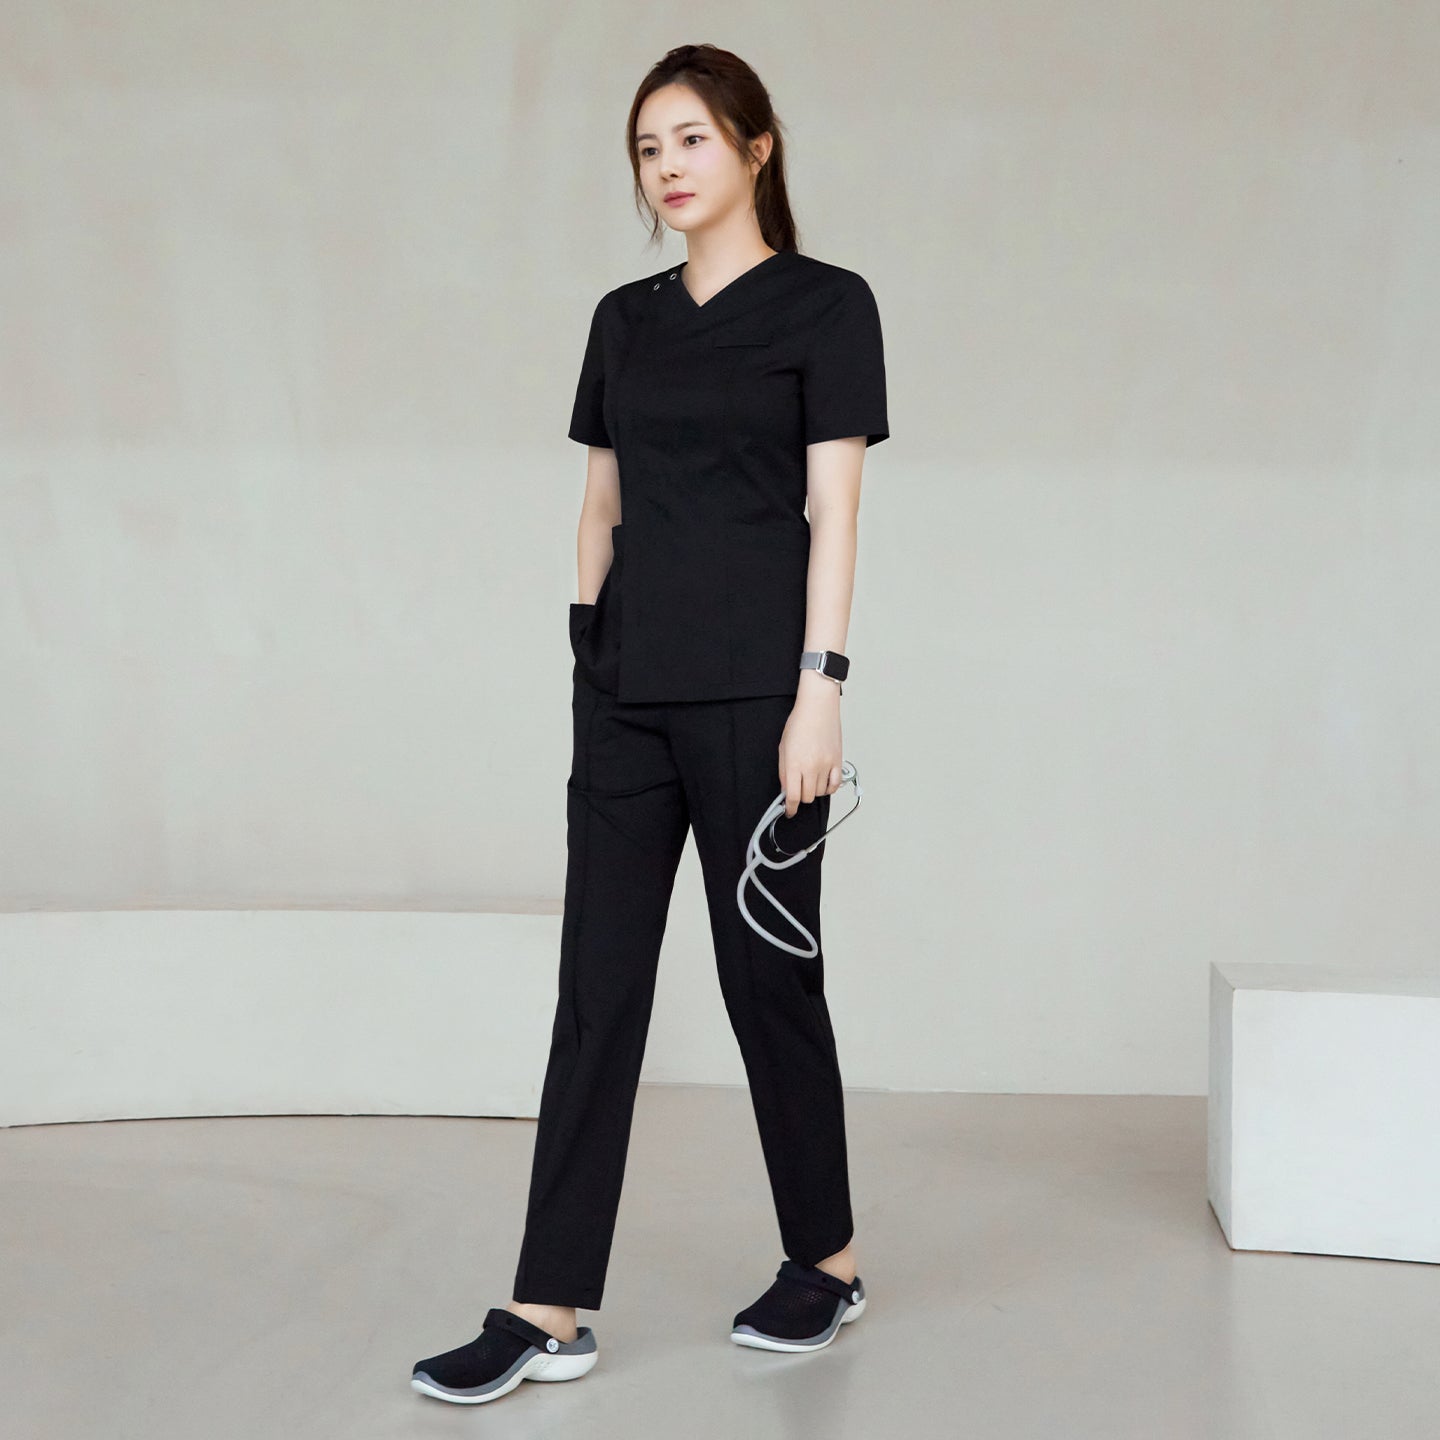 Full body view of a woman wearing Eco Black Line Banding Scrub Pants with a matching top, standing with one hand in her pocket and holding a stethoscope,Eco Black